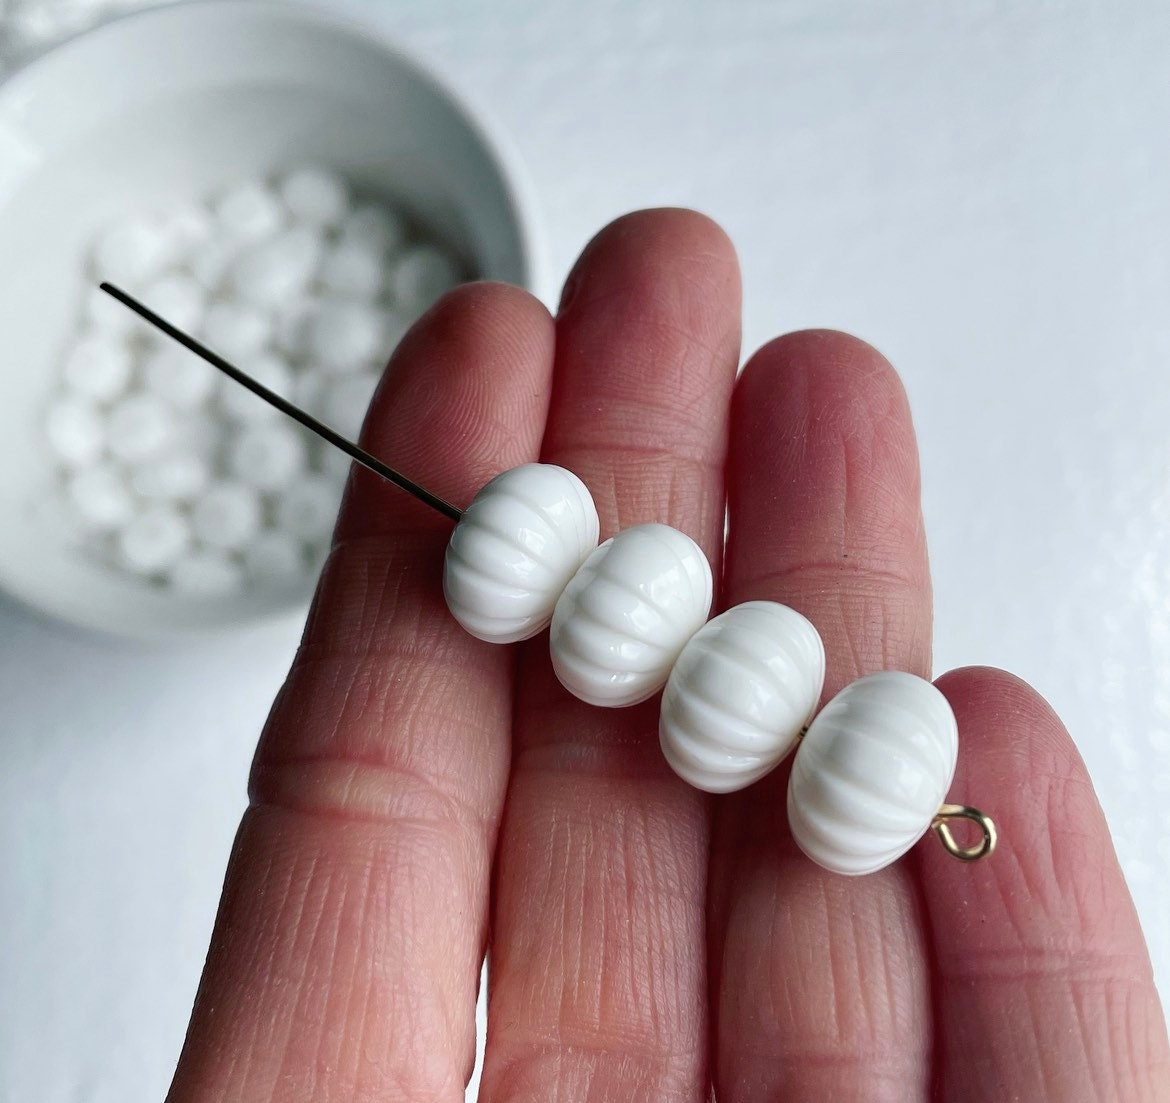 White Spacer Lampwork Beads For Jewelry Supplies, Glass Beads For Jewelry  Design, Beads For Craft Supplies, Small Round Beads For Bracelet